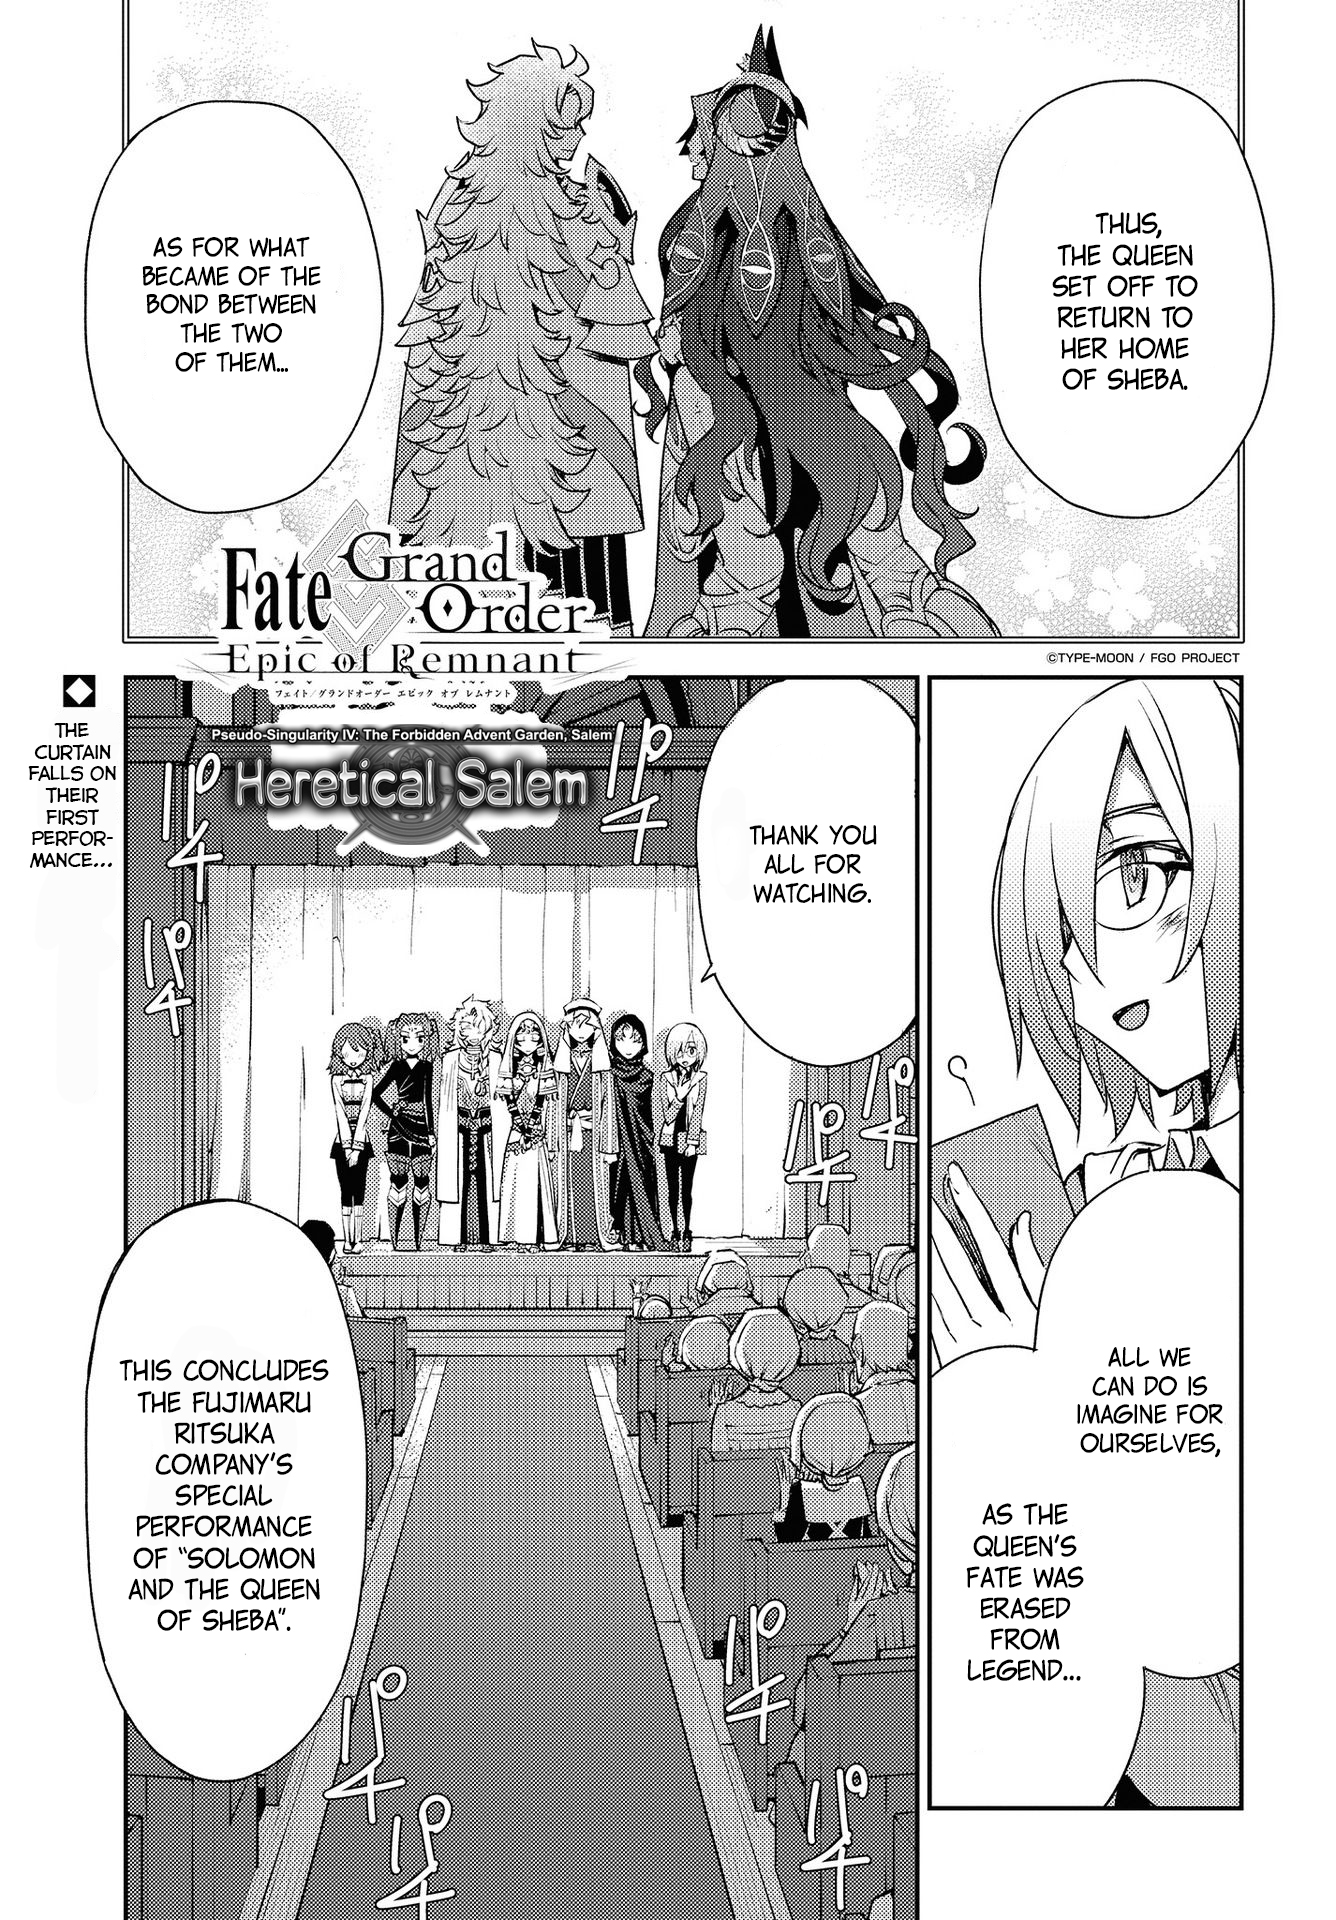 Fate/grand Order: Epic Of Remnant: Pseudo-Singularity Iv: The Forbidden Advent Garden, Salem - Heretical Salem Chapter 8: Unknot: Before Dawn 7 - Picture 1